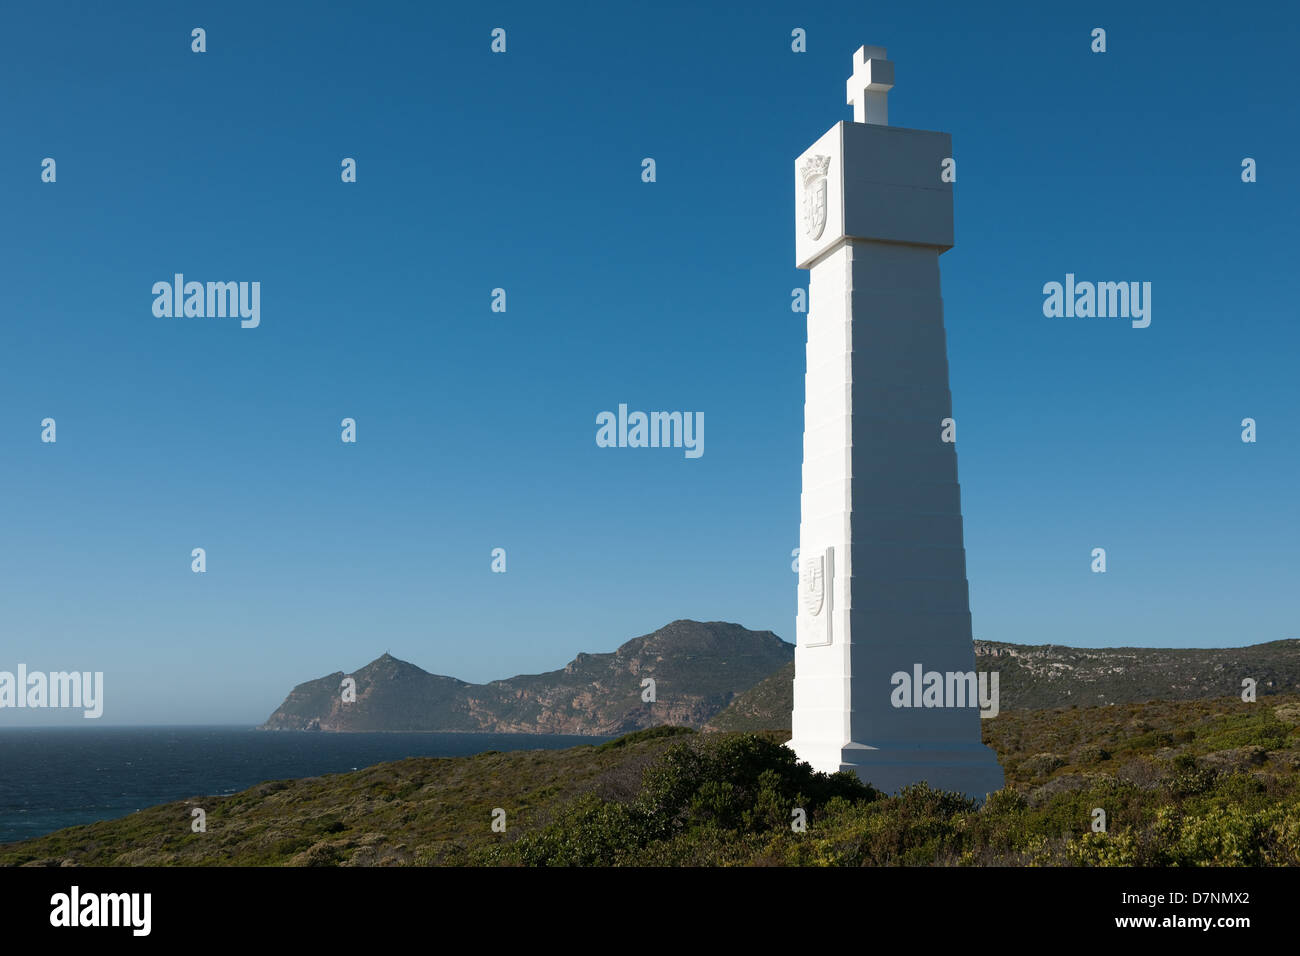 Reproduction of  the Cross of Vasco da Gama at Cape of Good Hope Nature Reserve, Cape Peninsula, South Africa Stock Photo